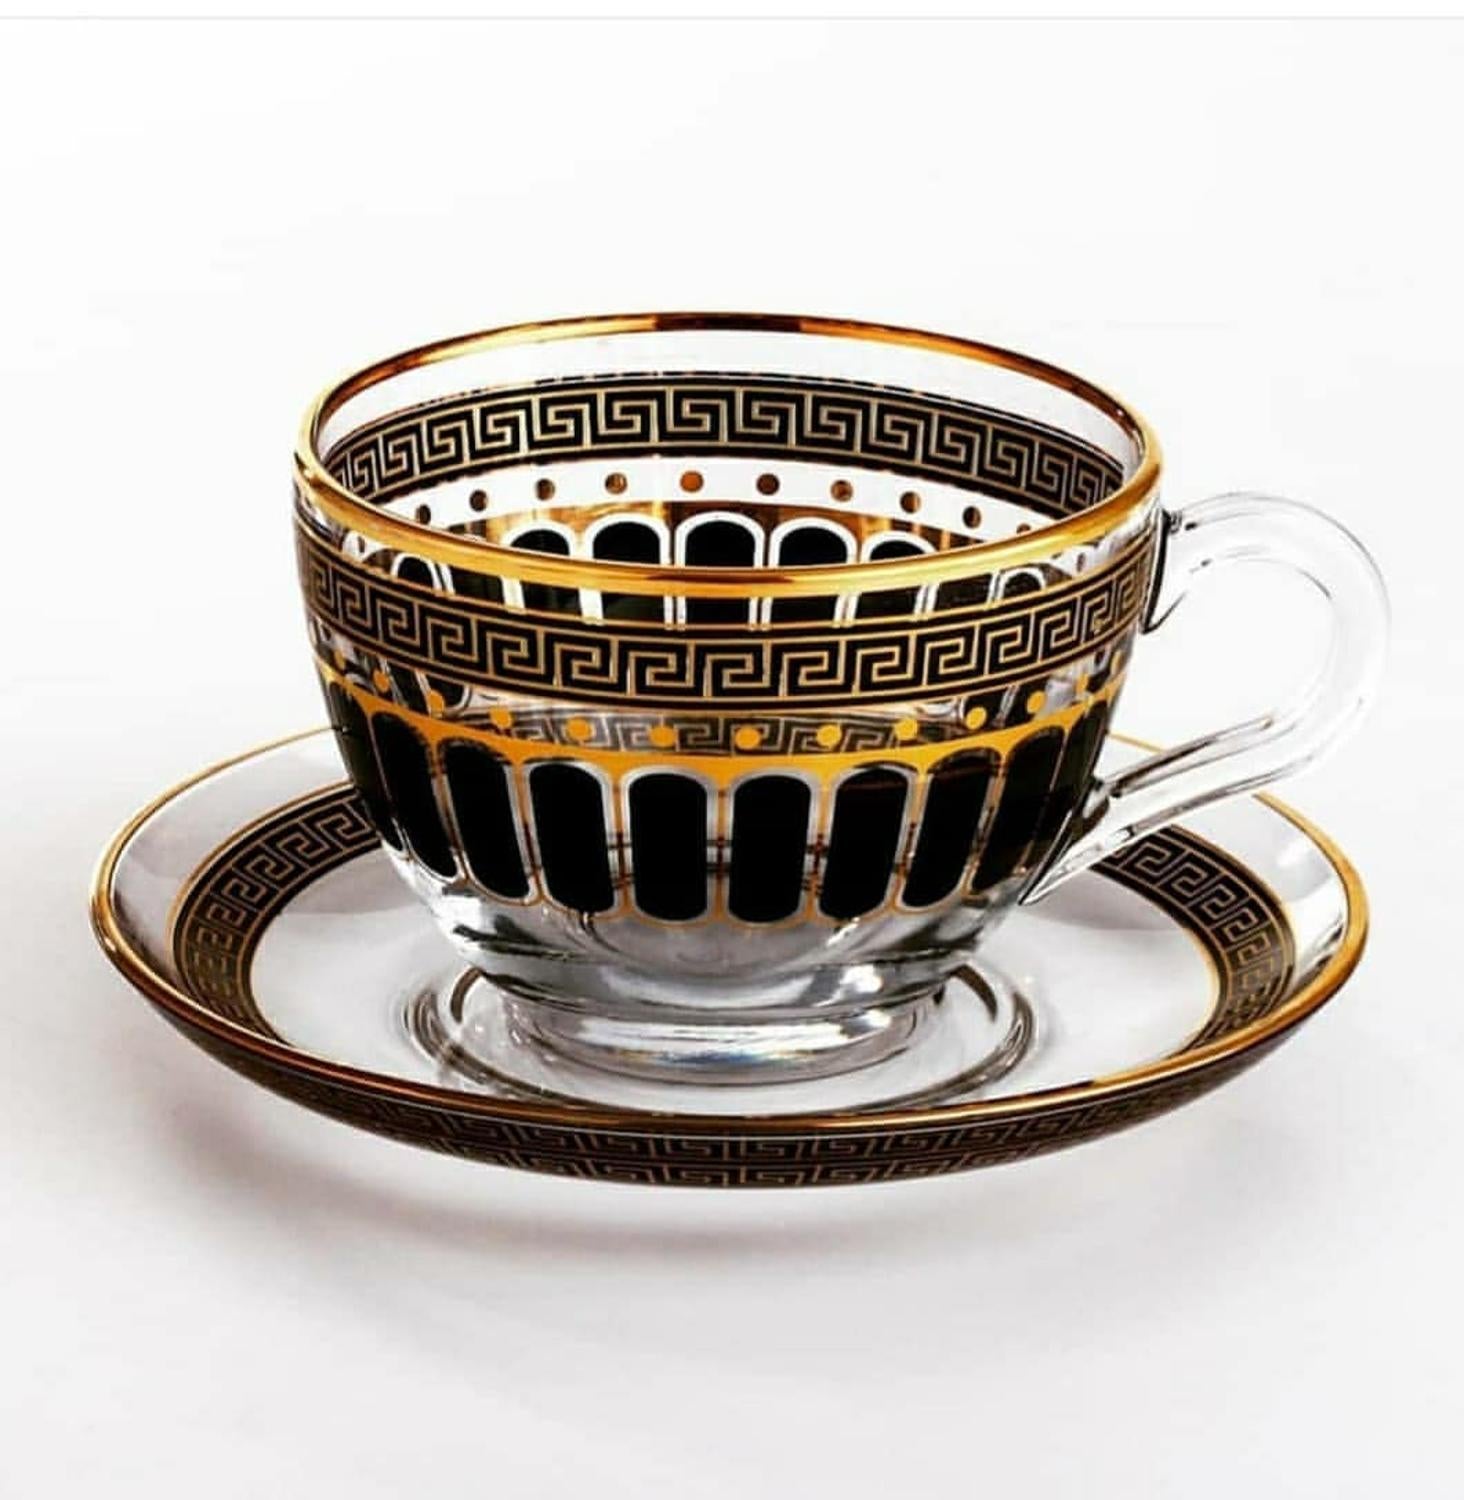 Handmade authentic gold silver Anatolian Arabic Turkish tea cup and supports seti türkiye'de for six people made